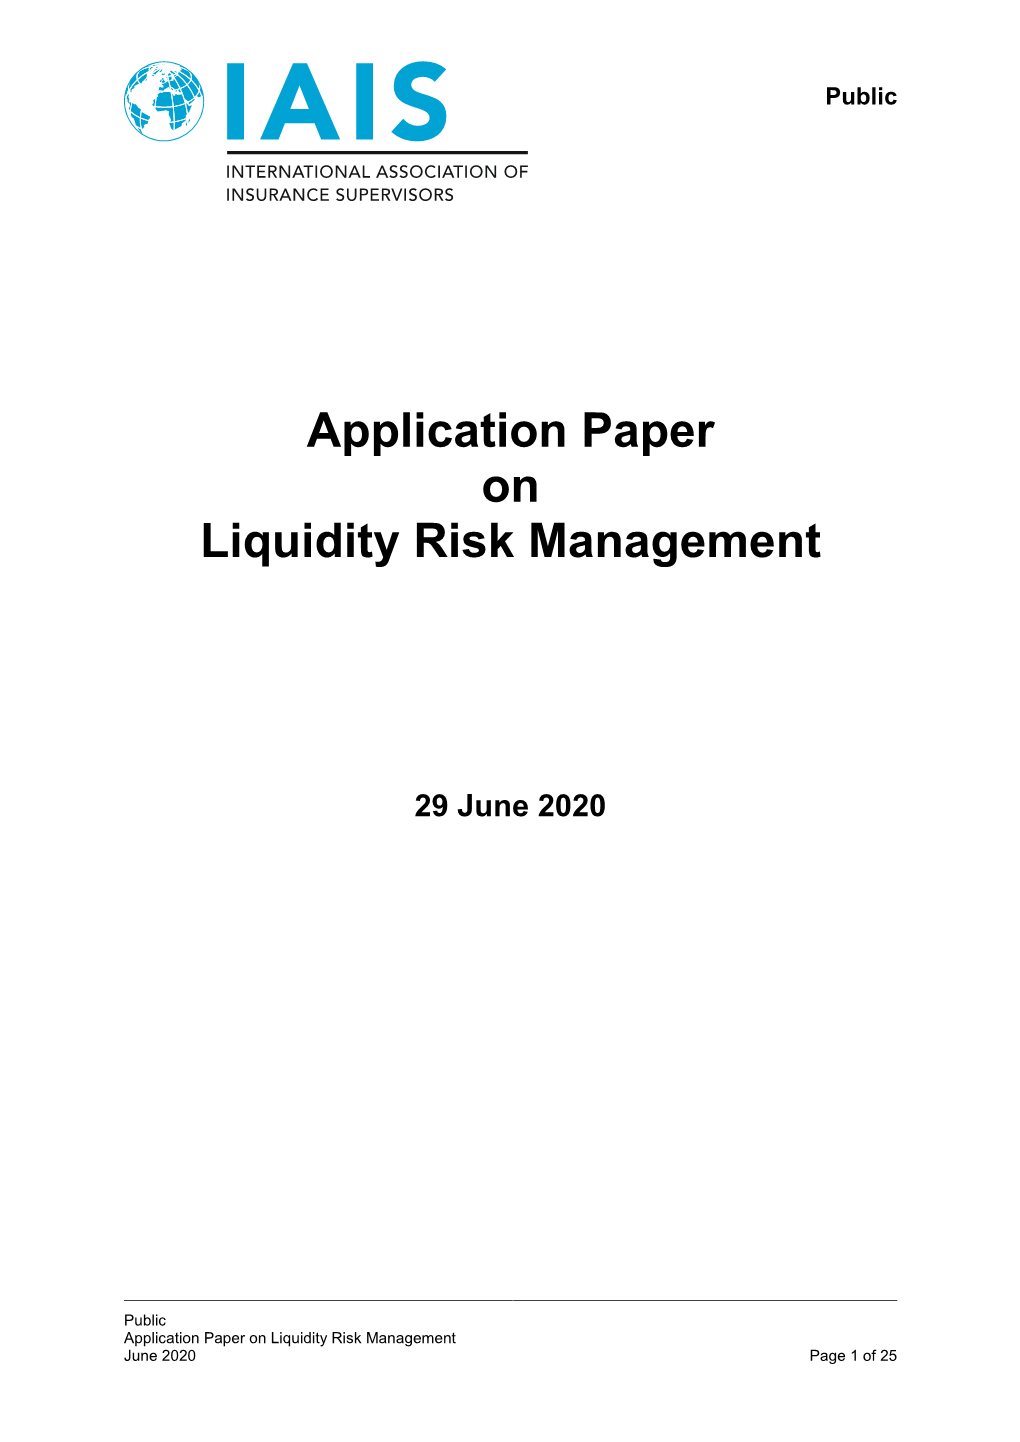 Application Paper on Liquidity Risk Management